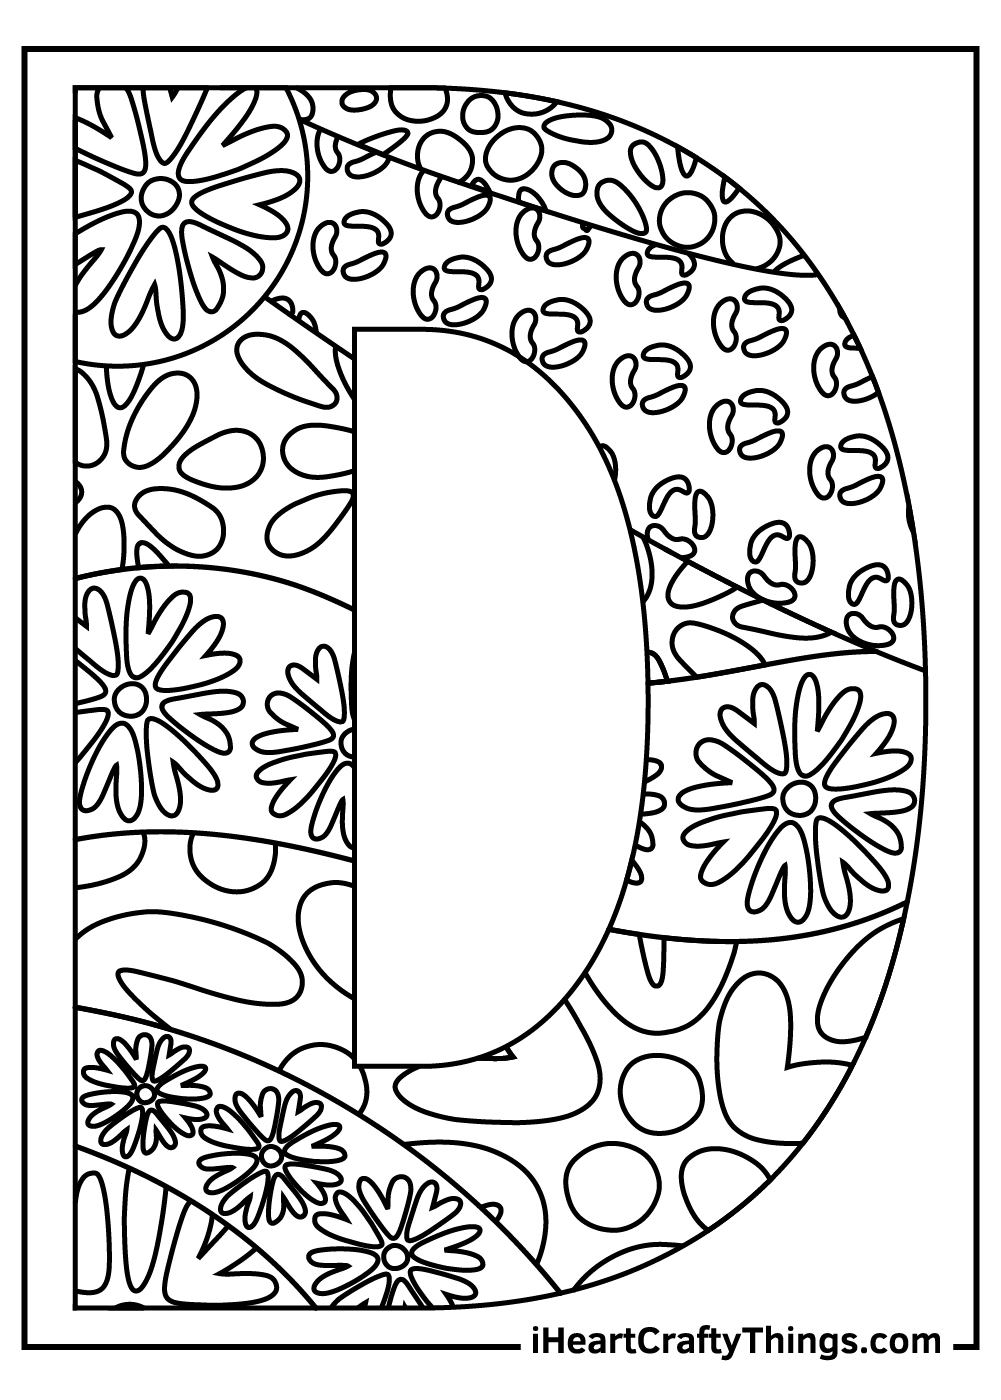 Letter d coloring pages free printables